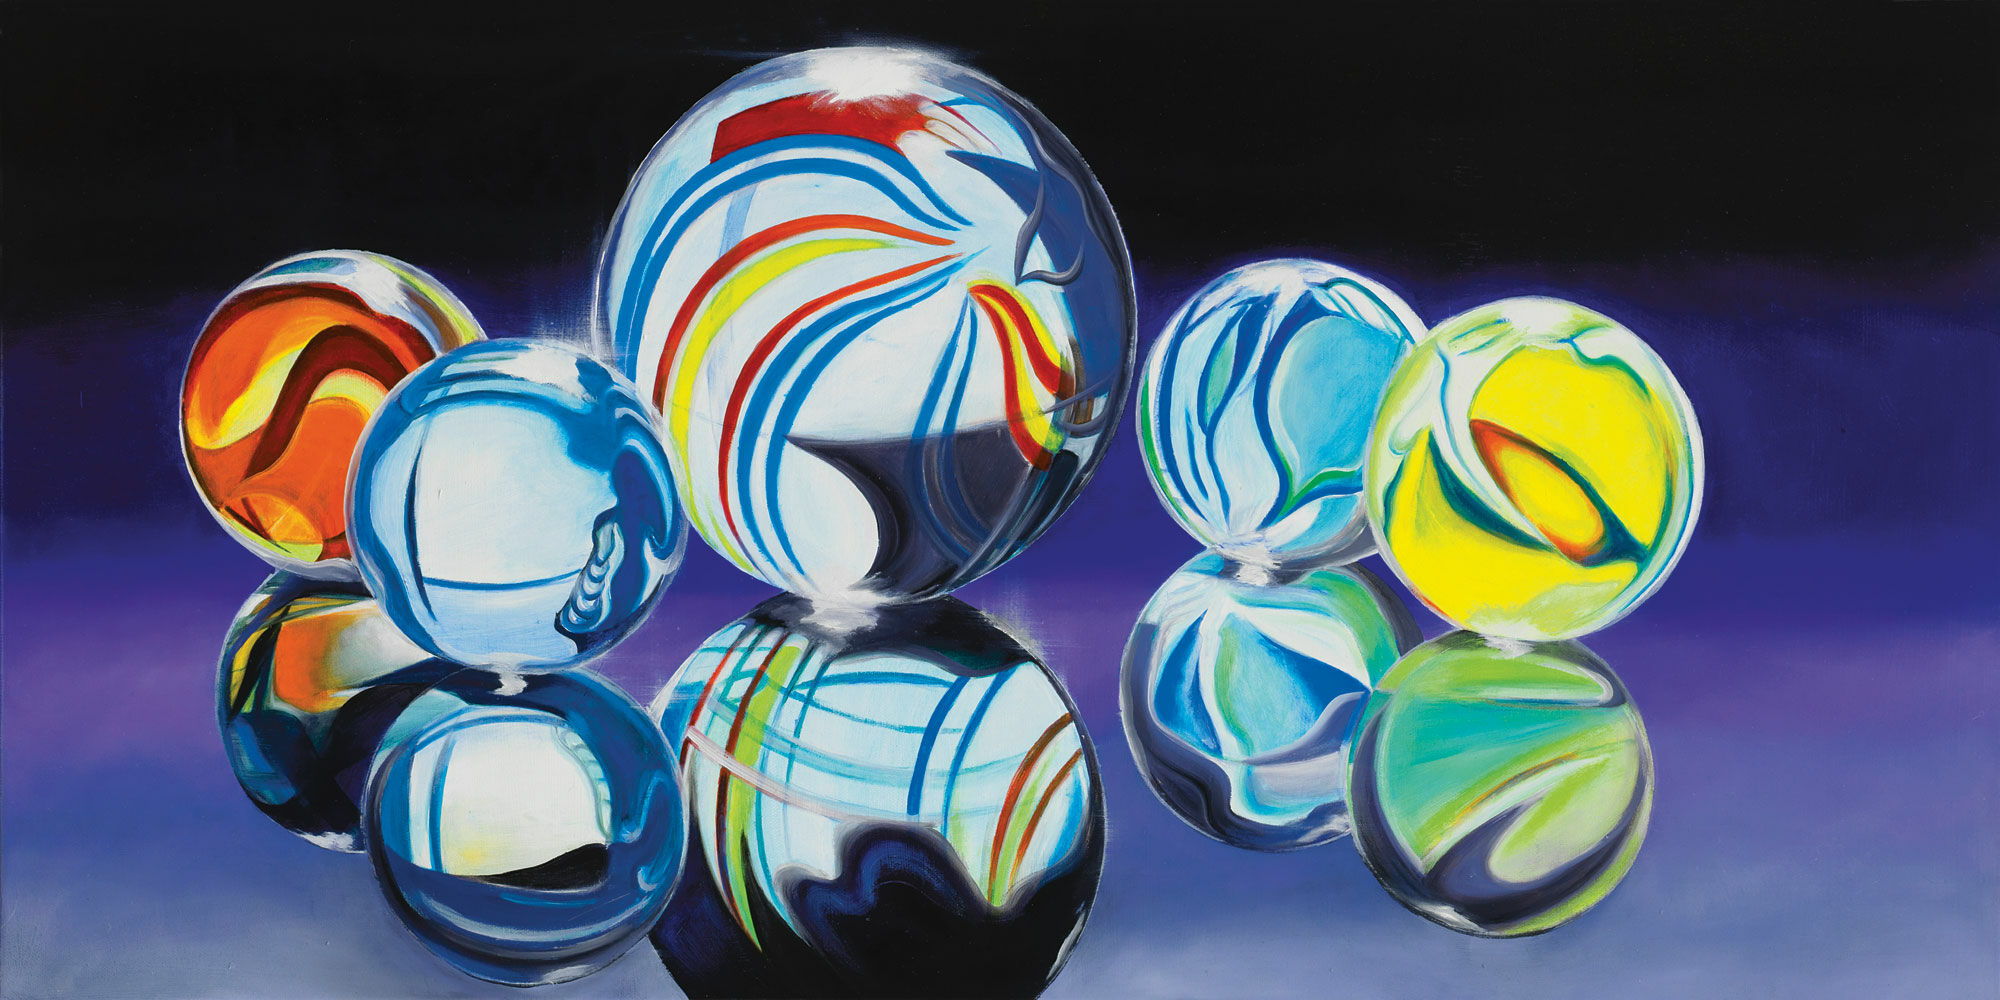 Picture "Glass Marbles" by Alex Krull